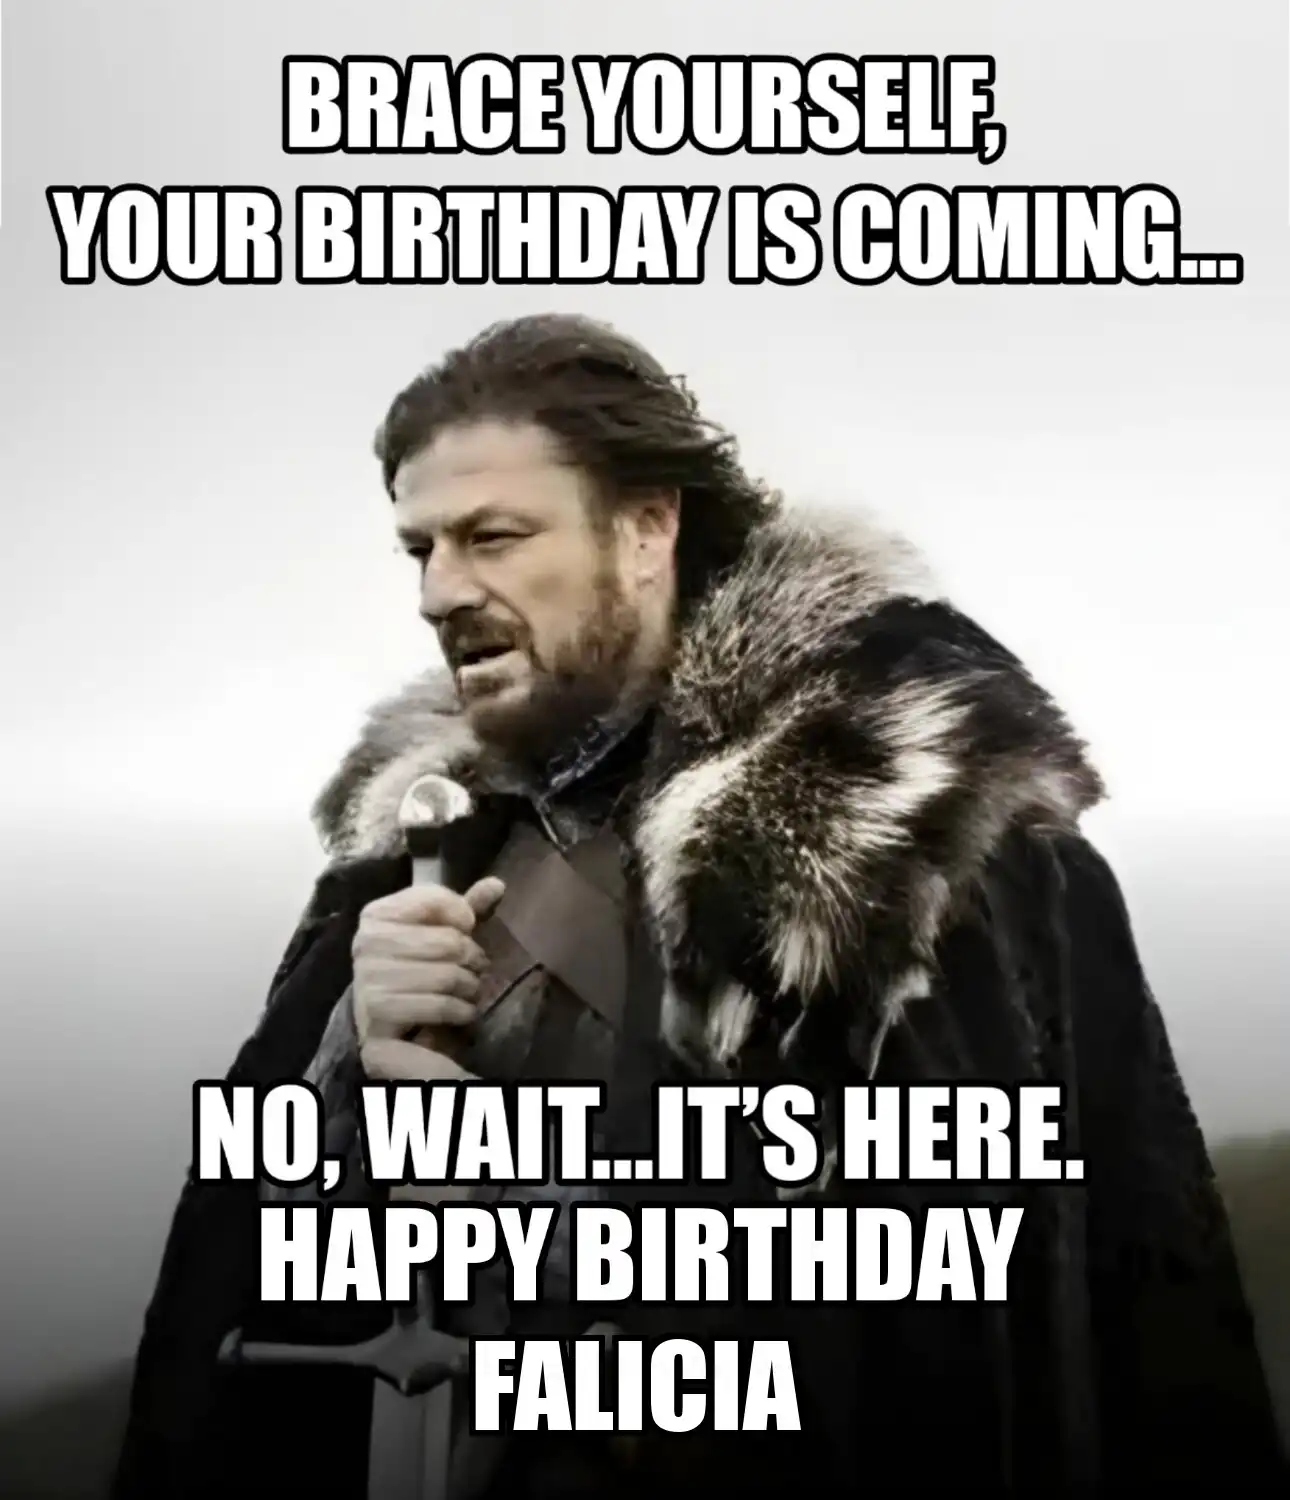 Happy Birthday Falicia Brace Yourself Your Birthday Is Coming Meme